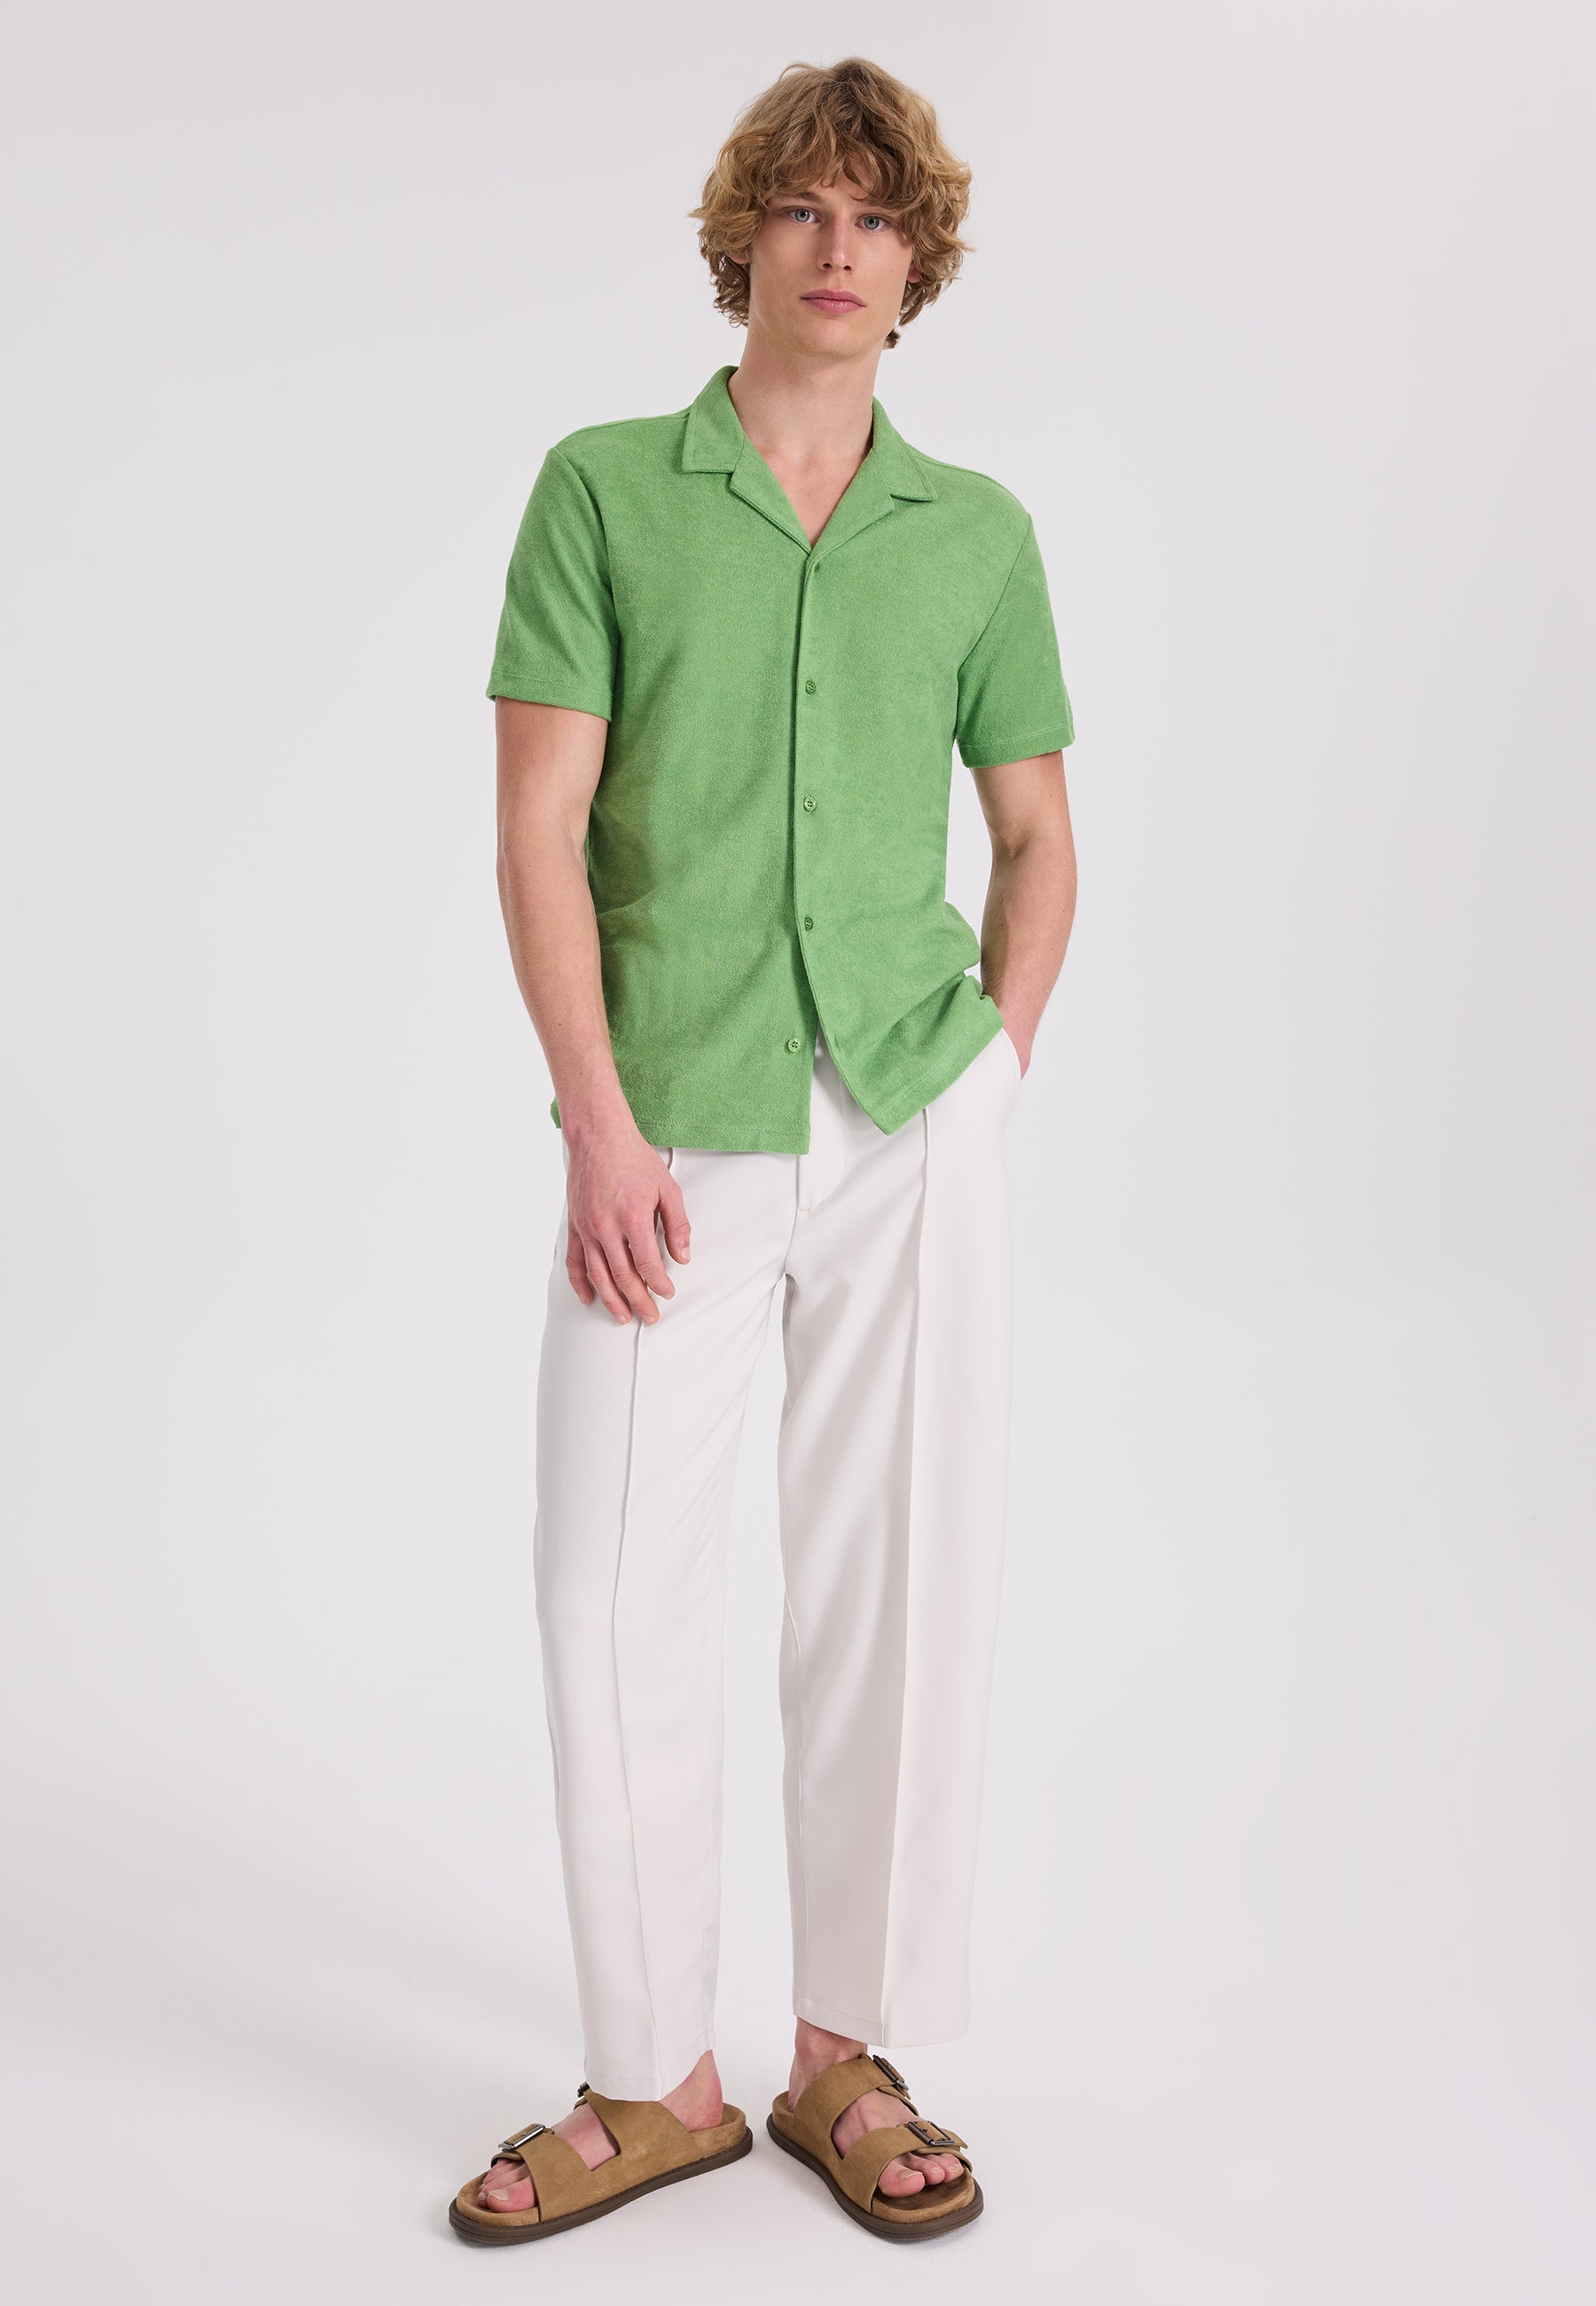 BREEZE TERRY TOWELLING S/S SHIRT in Piquant Green